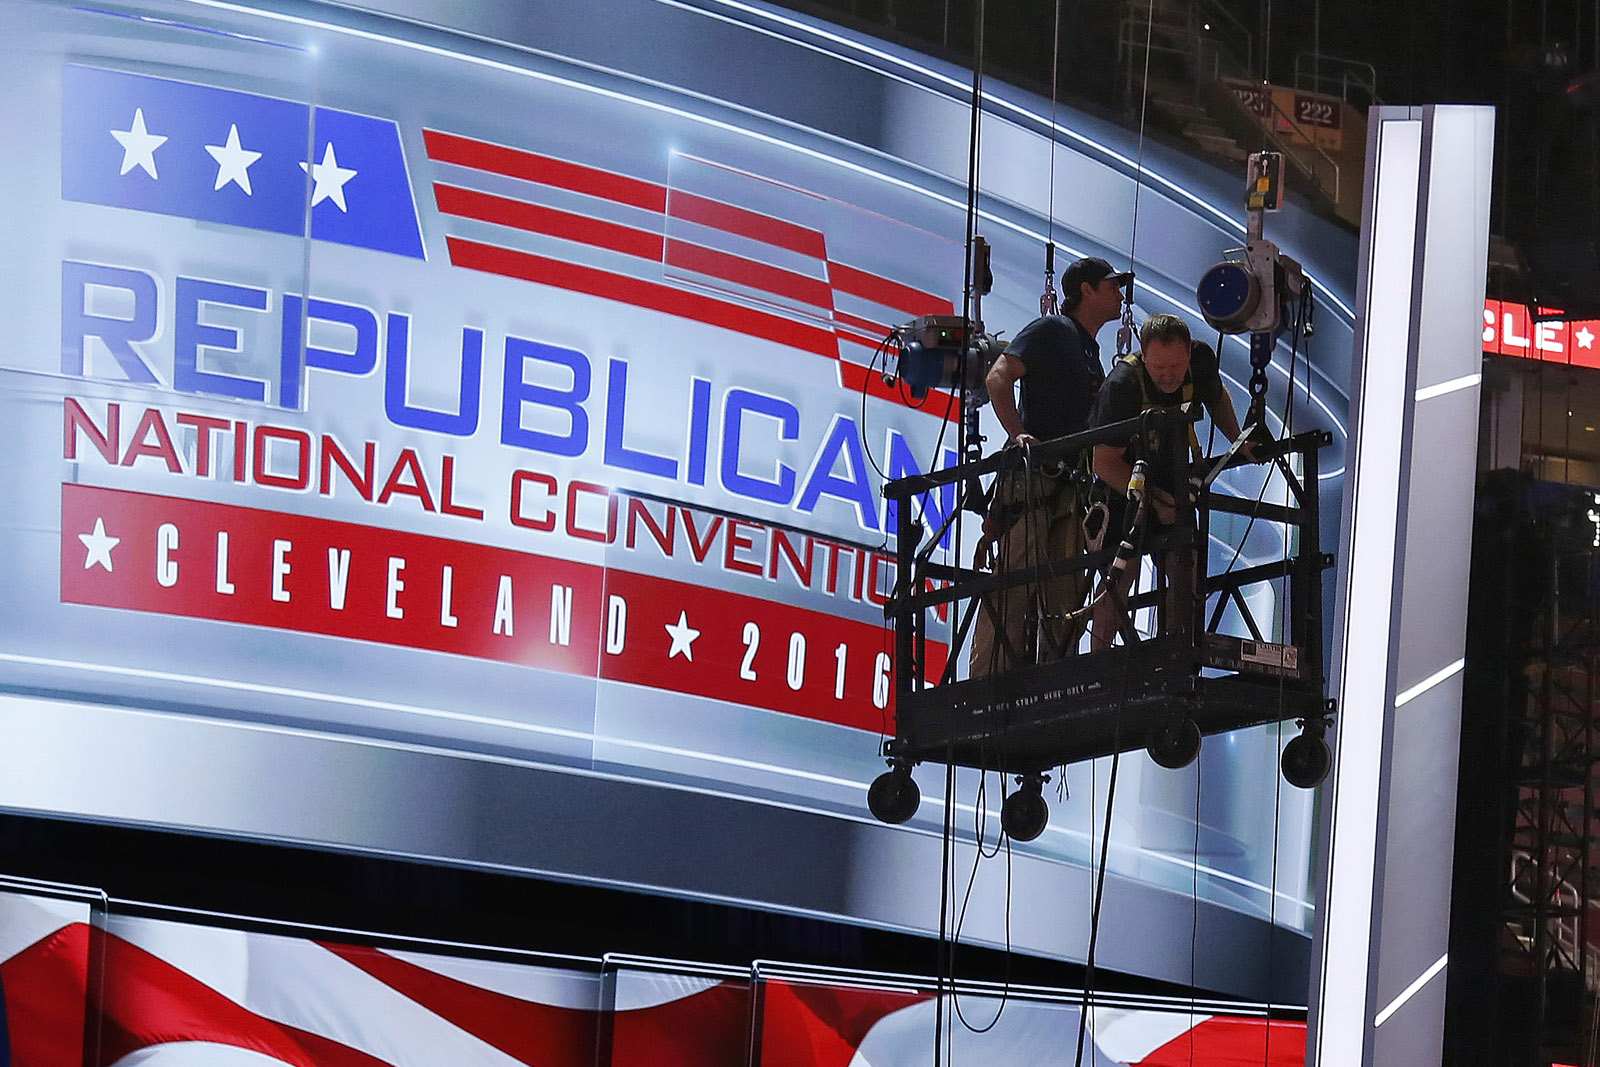 The main stage on the convention floor at the Quicken Loans Arena in downtown Cleveland, Ohio, is prepared for the upcoming Republican National Convention Wednesday, July 13, 2016. (AP Photo/Gene J. Puskar)